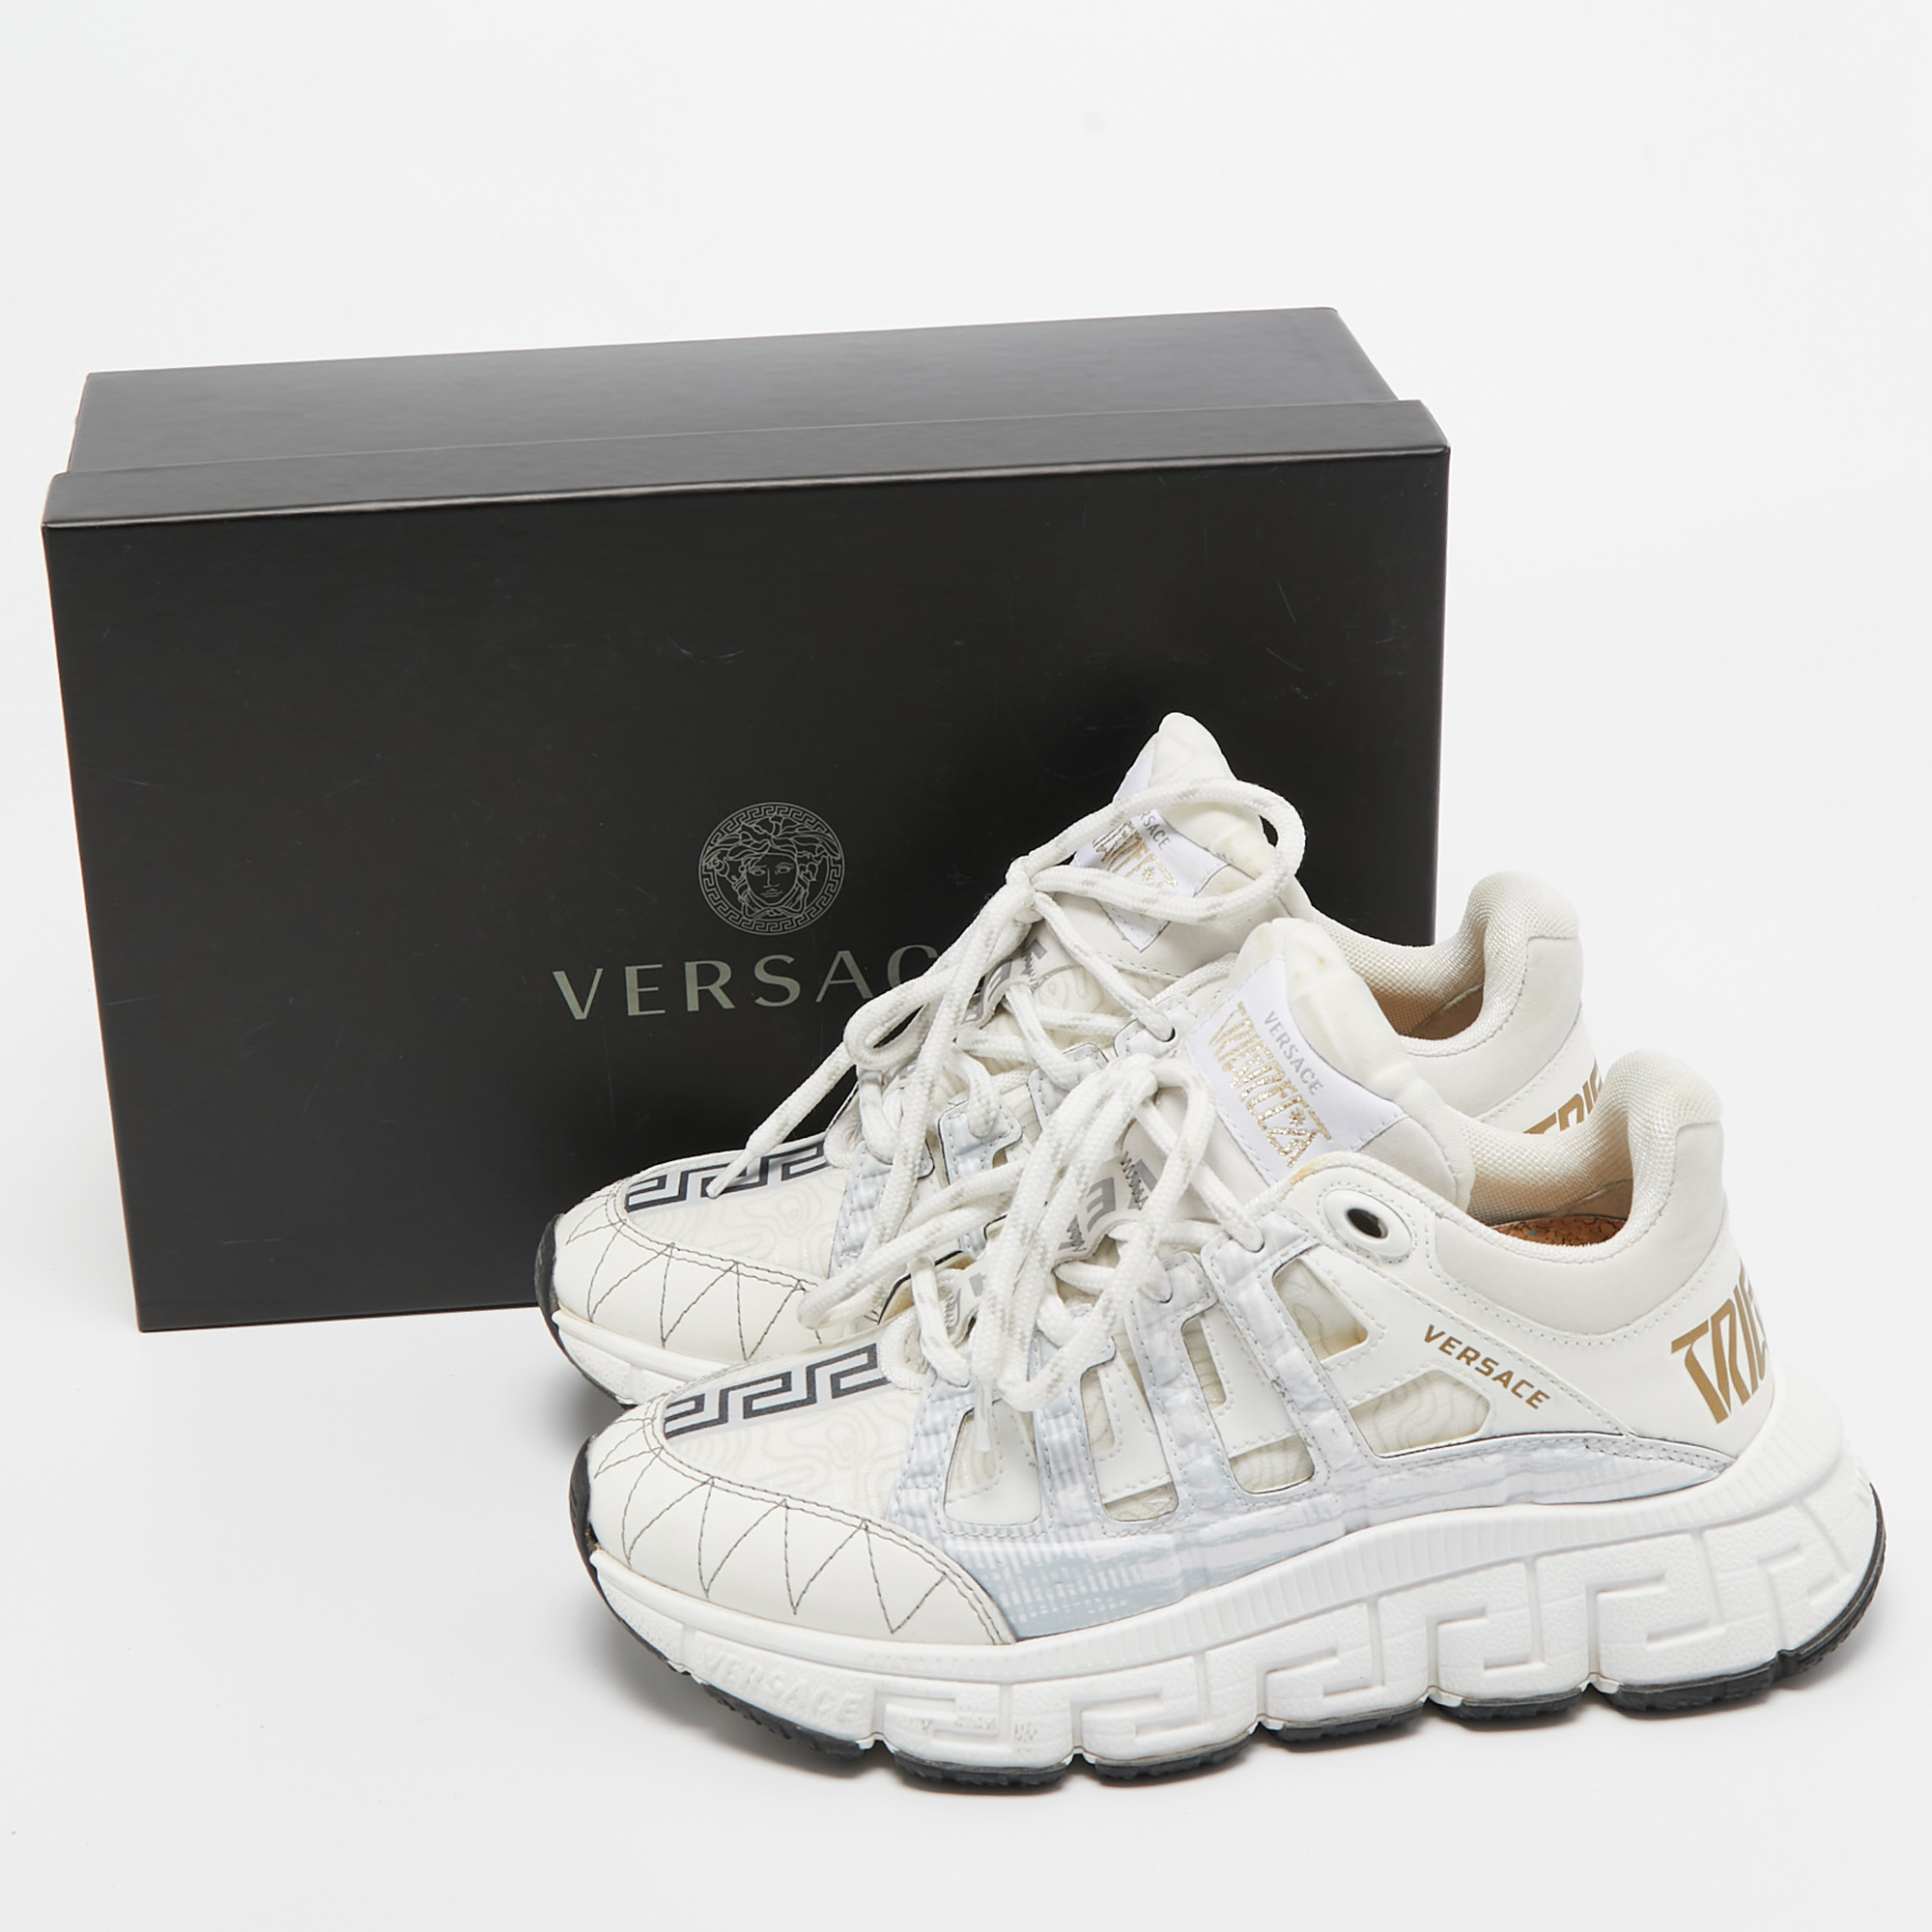 Versace White Leather And Coated Canvas Trigreca Sneakers Size 36